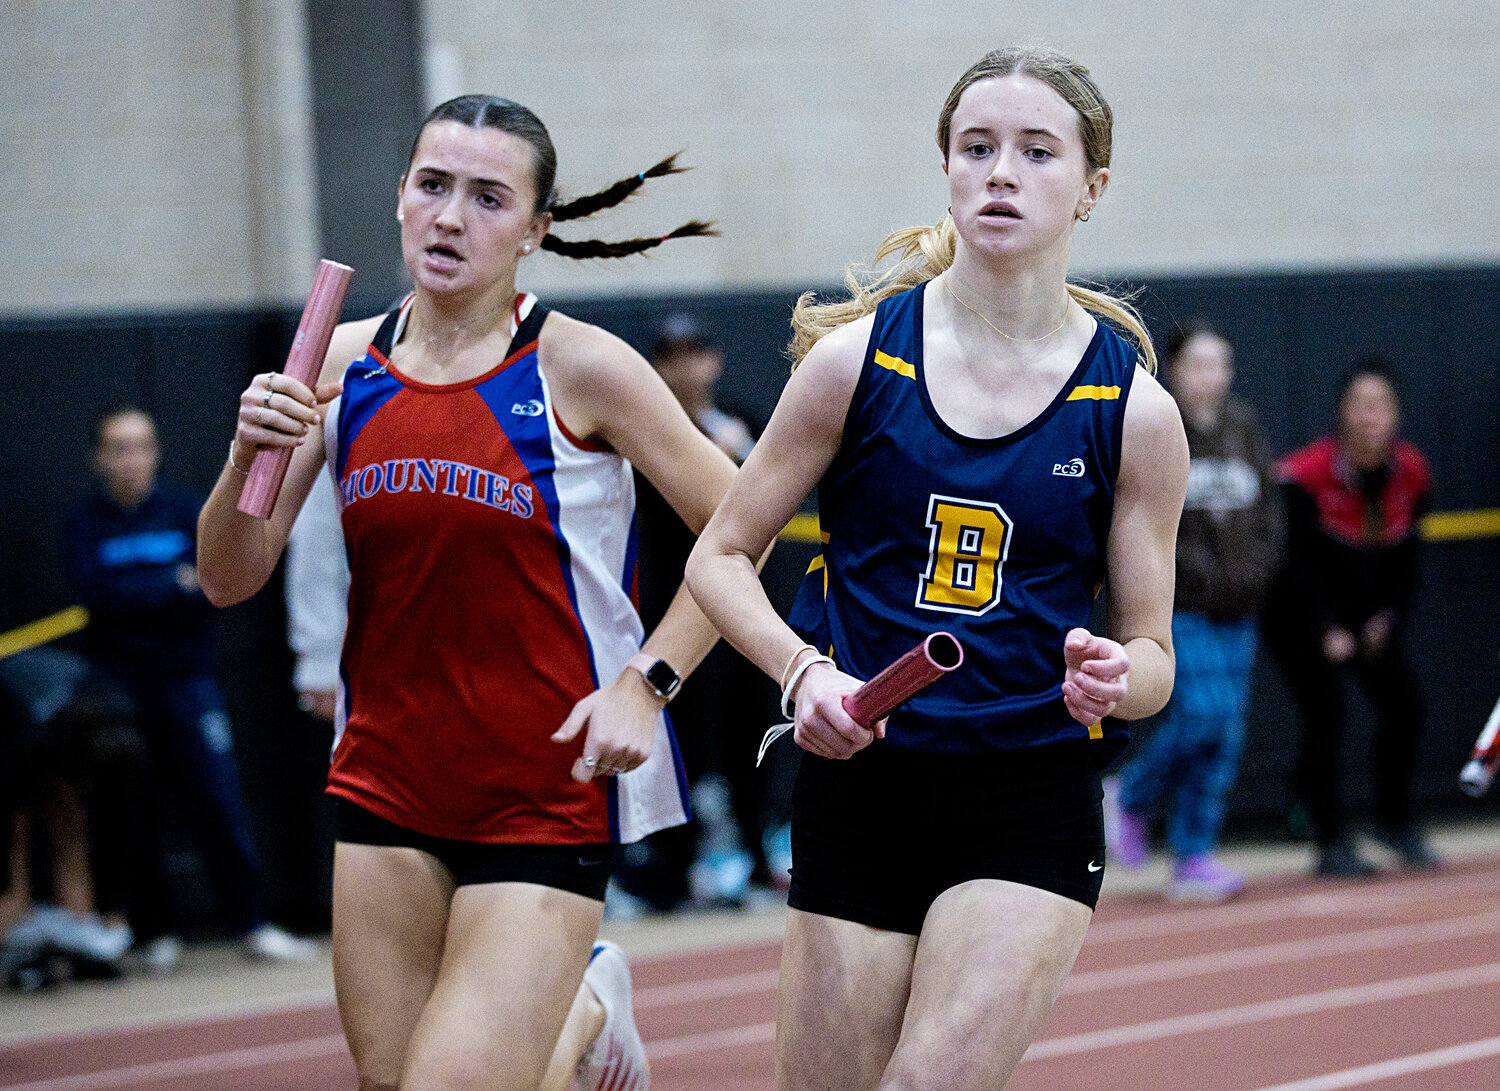 The Barrington High School girls indoor track team finished third at the Class Championship meet. Here, a Barrington runner (right) competes in the division championship meet.